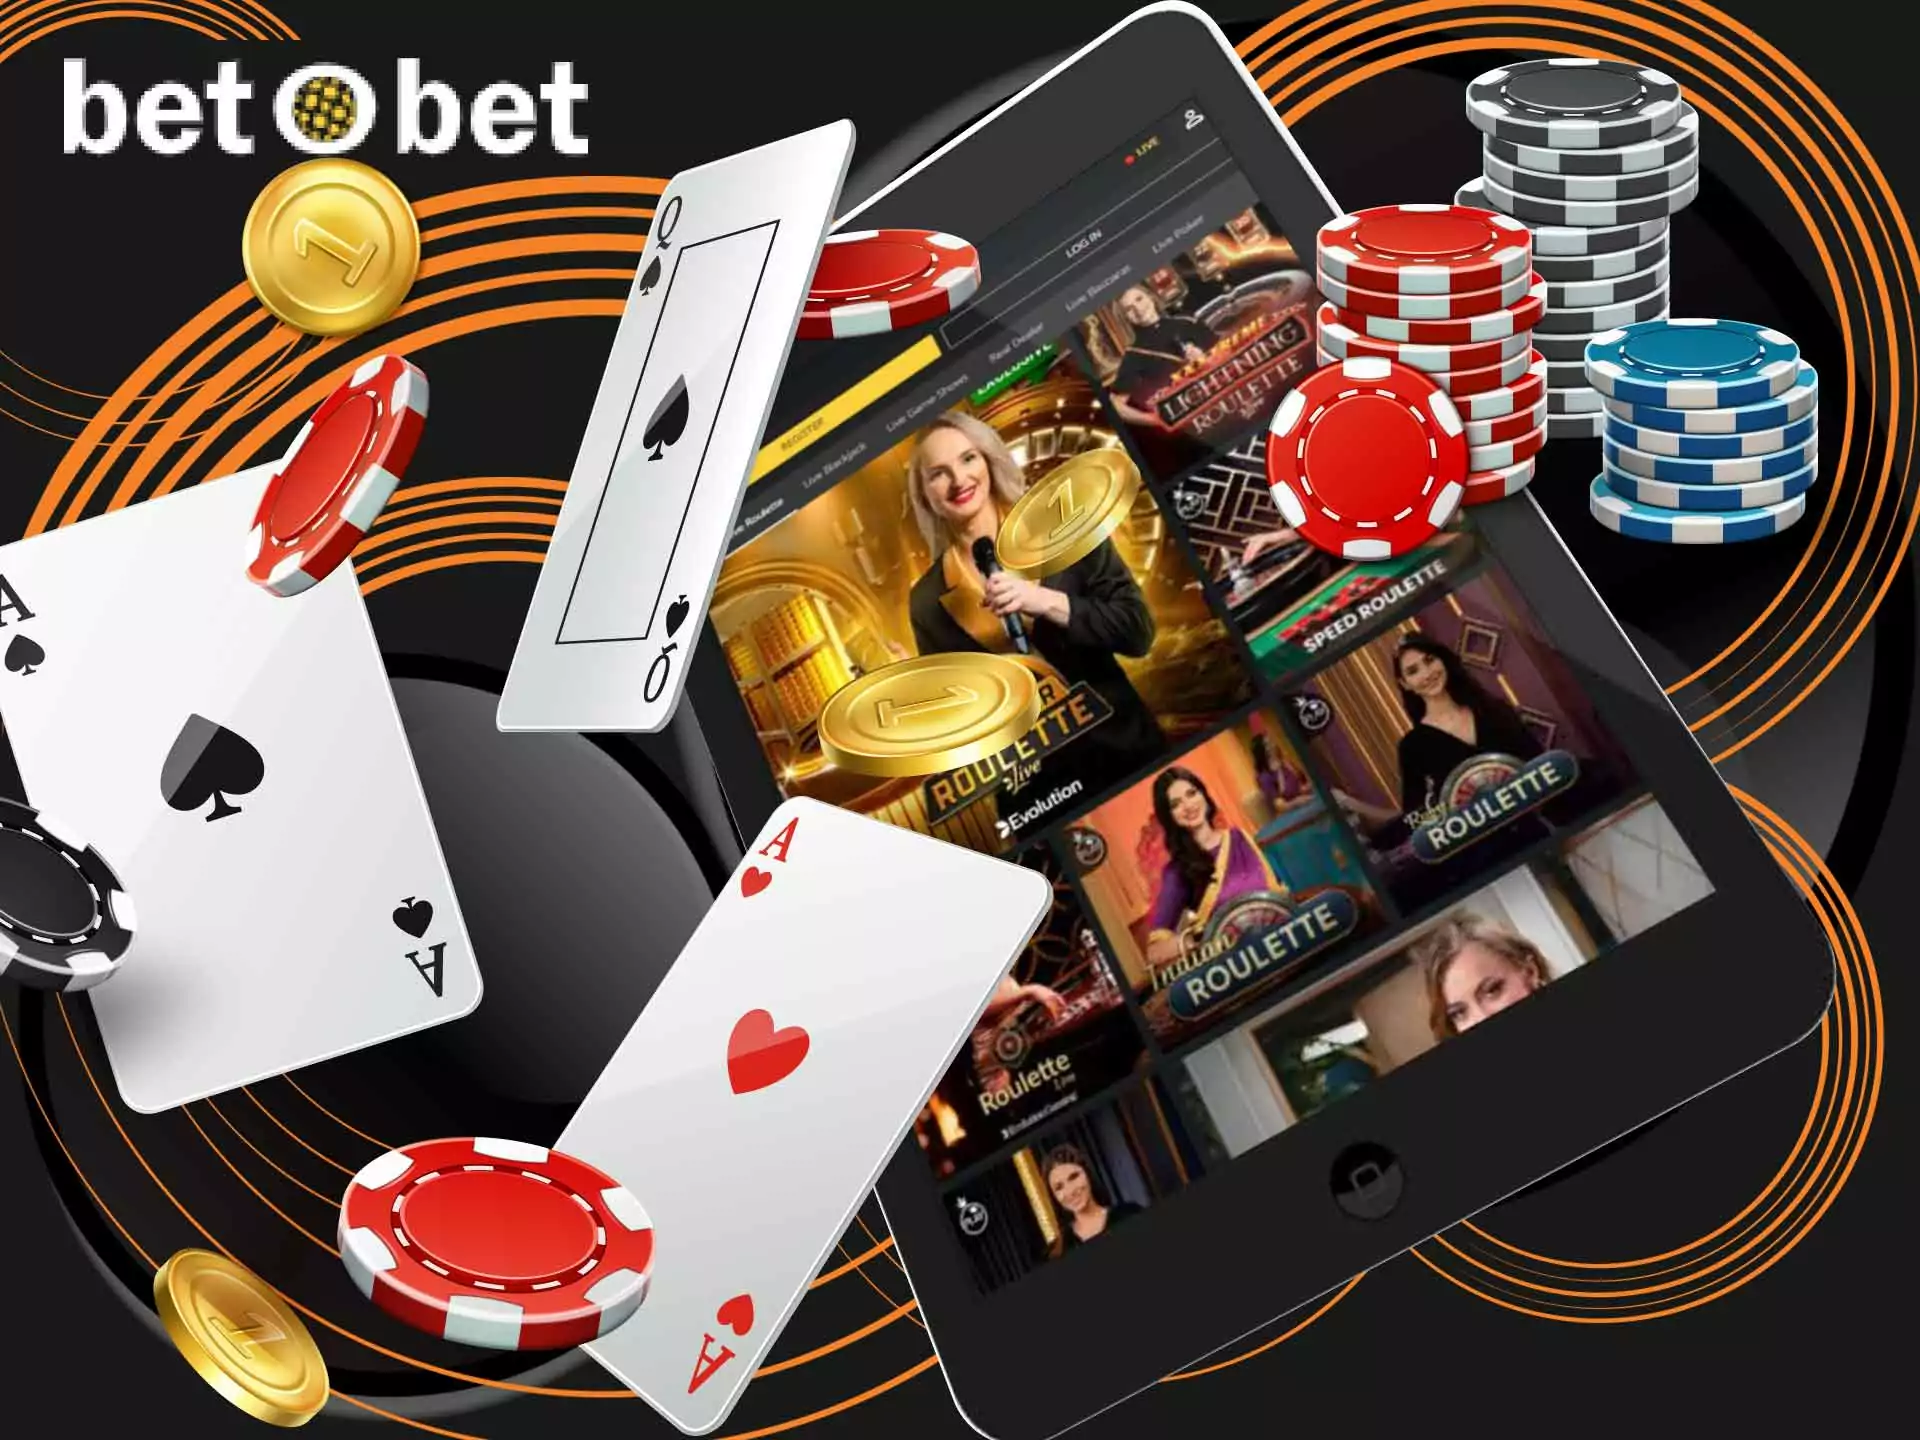 There is also a casino section in the BetOBet app.